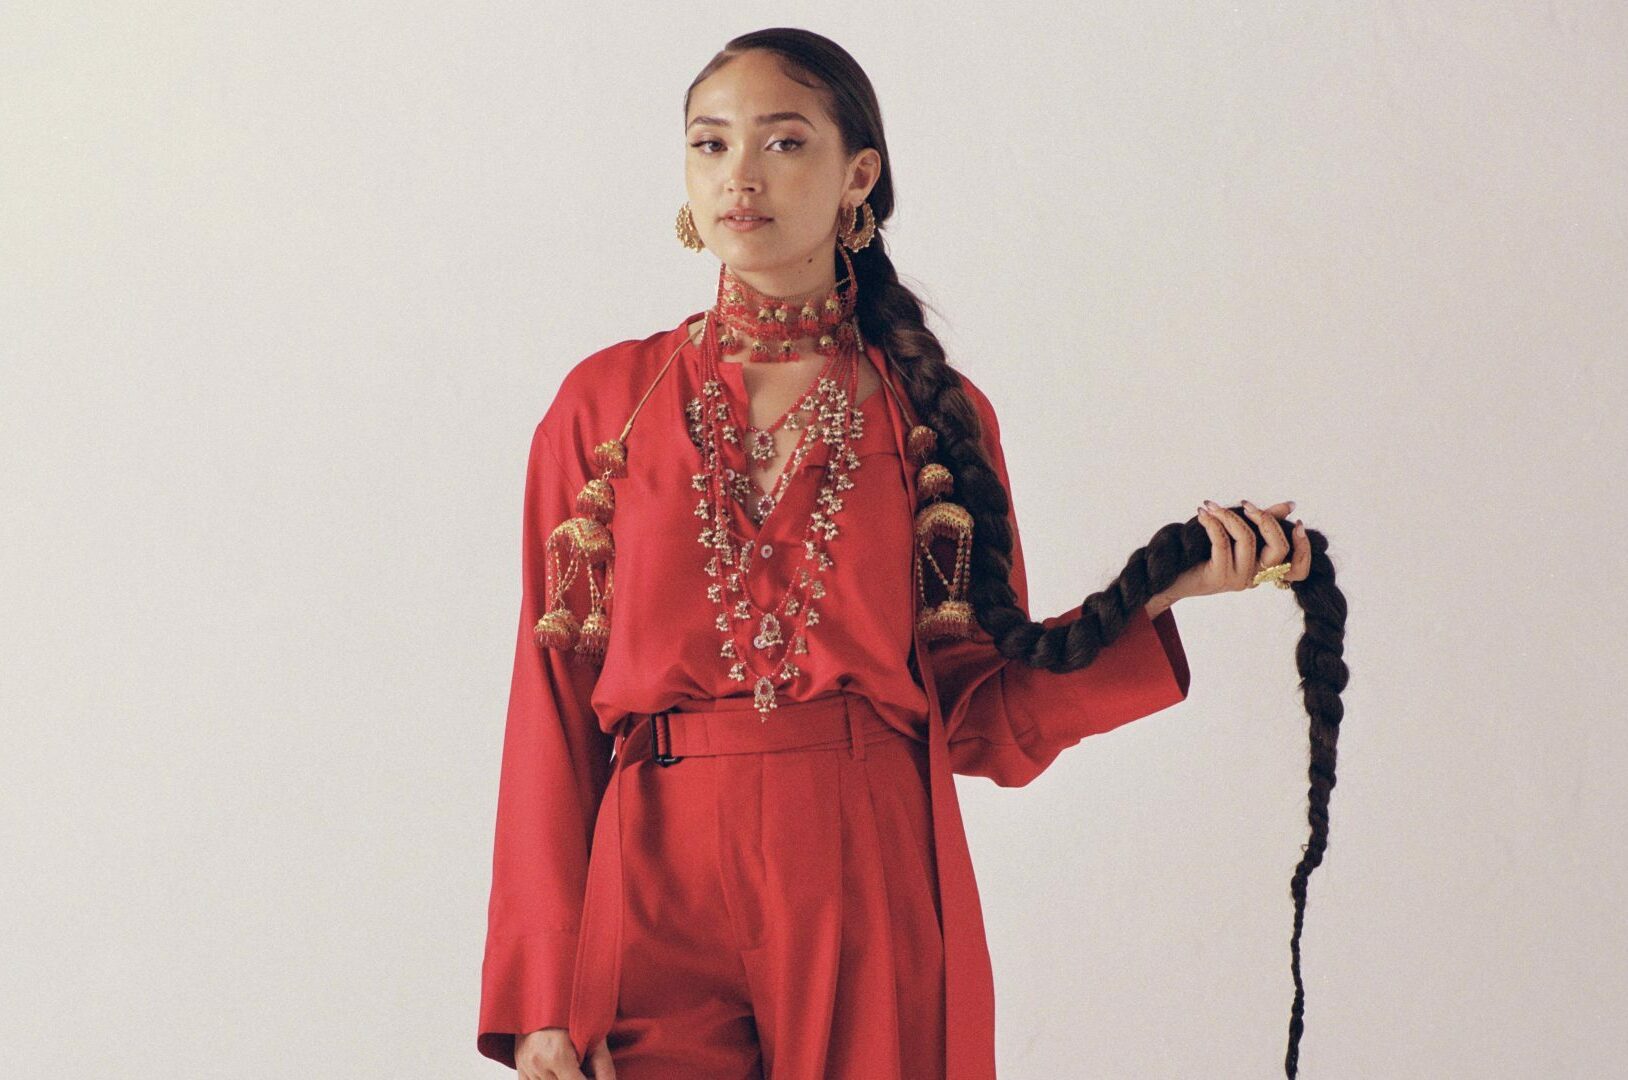 Joy Crookes press photo. Joy is waring an orange jumpsuit and standing in front of a beige backdrop.